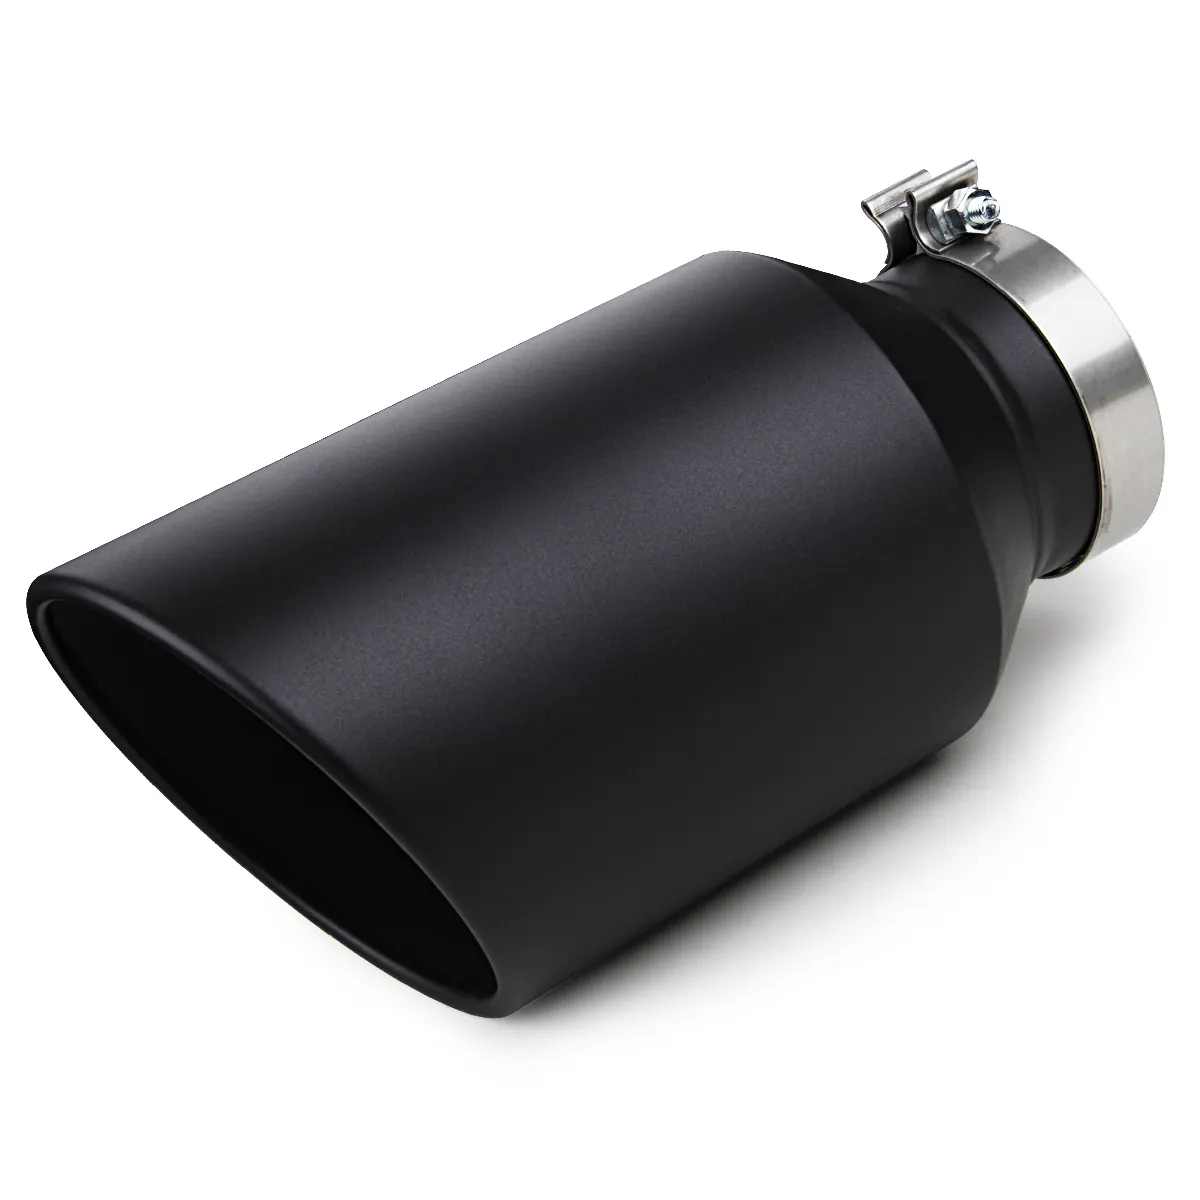 Muffler Factory Perennial Sale Car Angle Cut End Suffer Sliver Mirror Polished Carbon Exhaust Tip Automobile Muffler